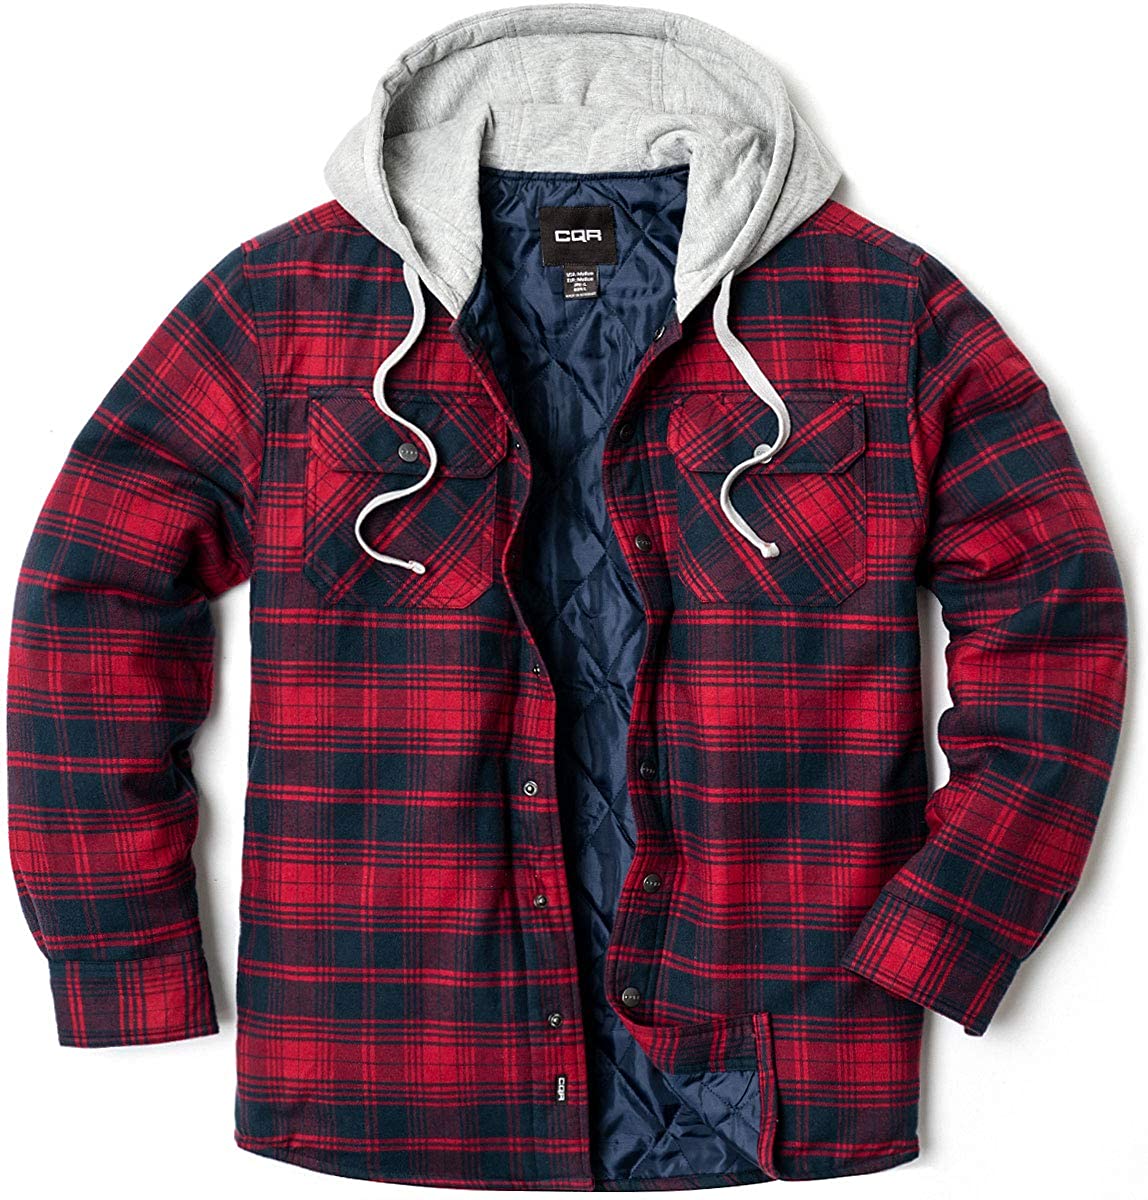 Men's Flannel Plaid Shirt Jacket with Hood Quilted Lined Coat